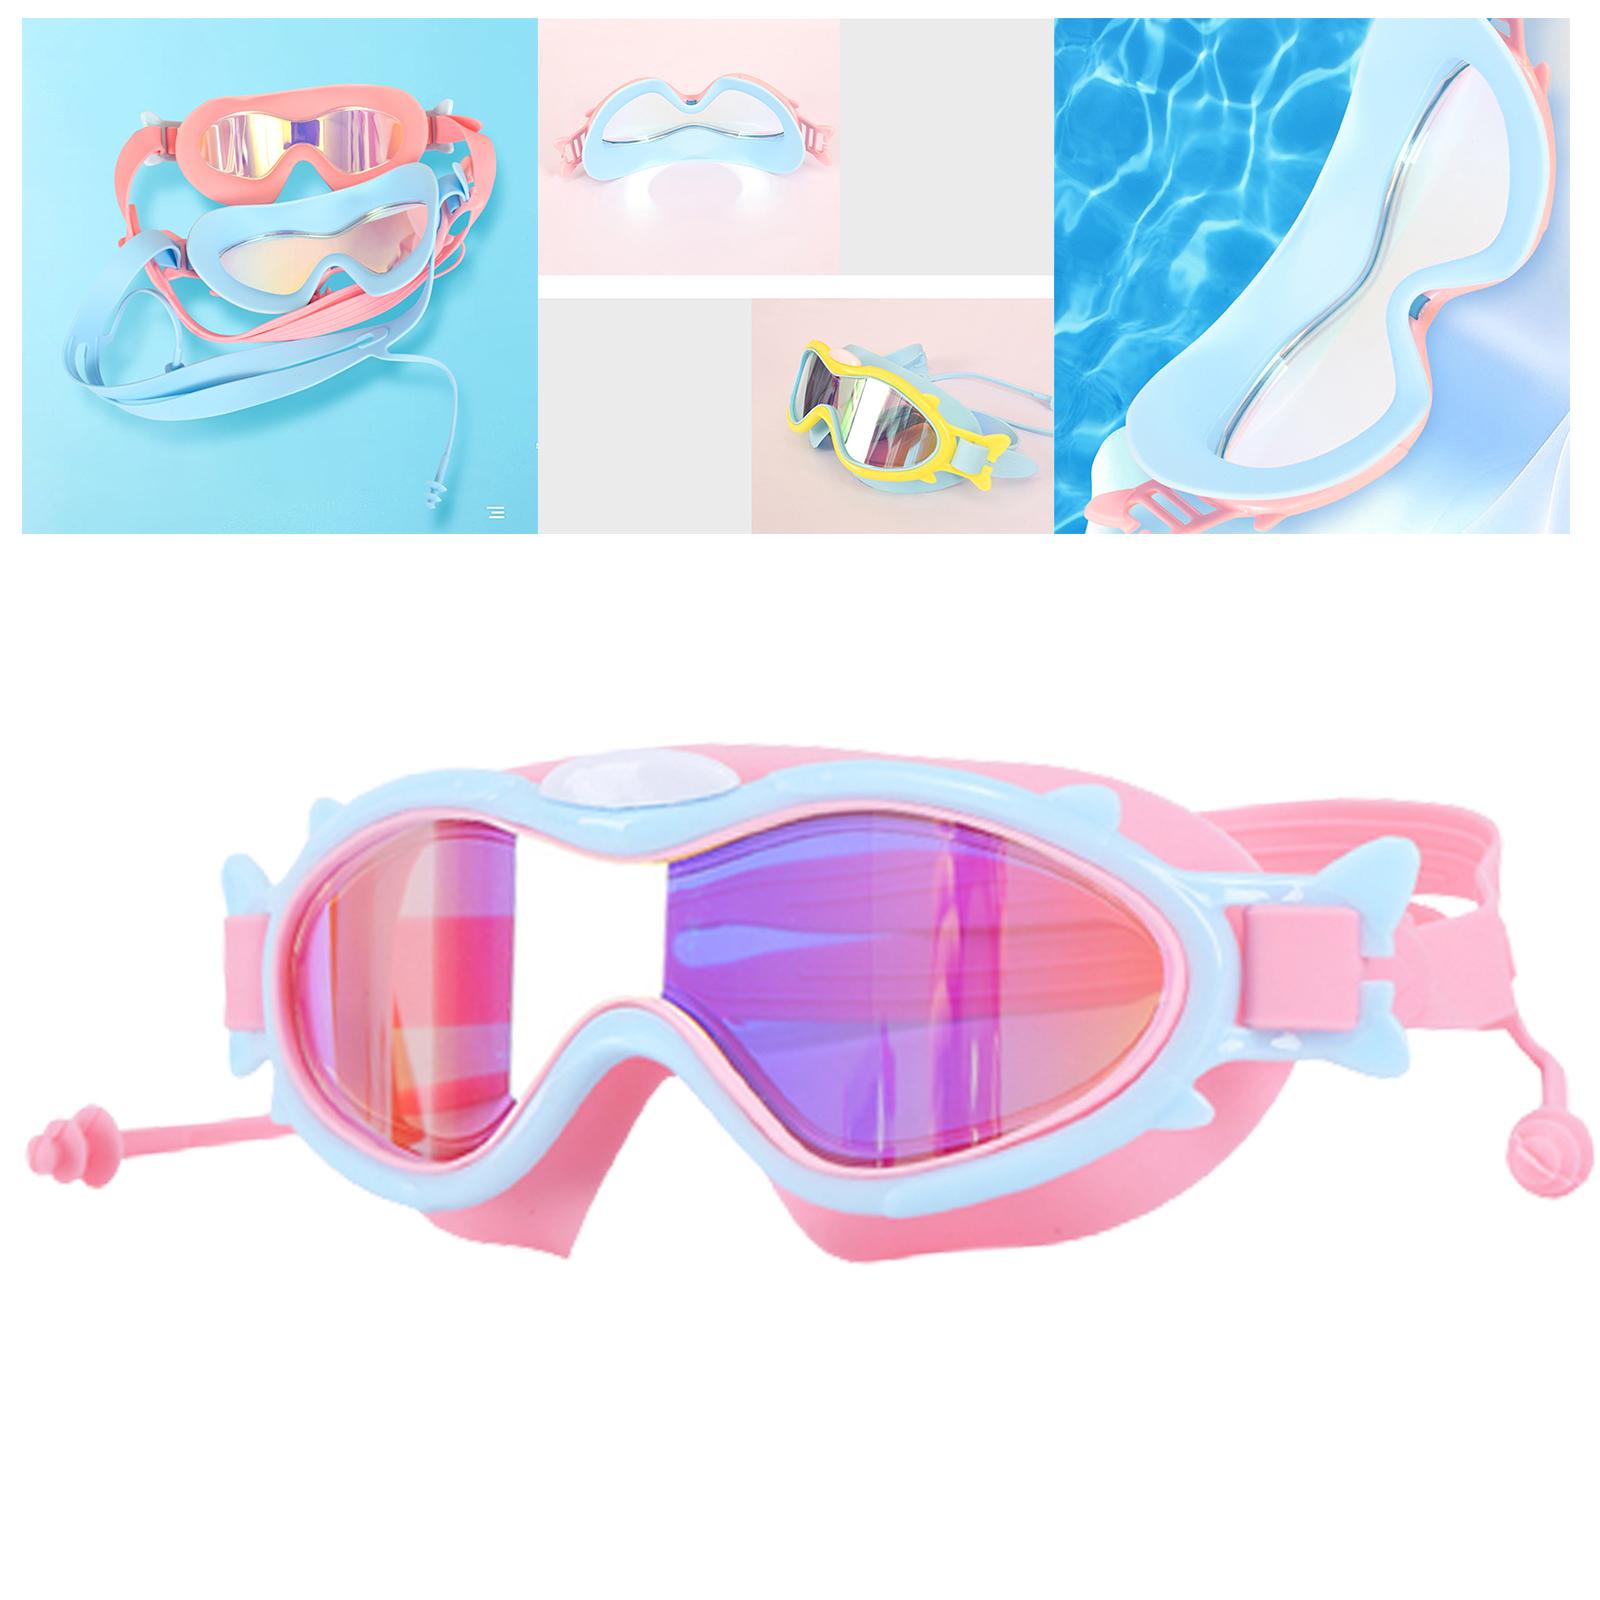 Kids Swimming Goggles with Ear Plugs Swim Goggles for Kids 6-14 Boys Girls Pink Blue